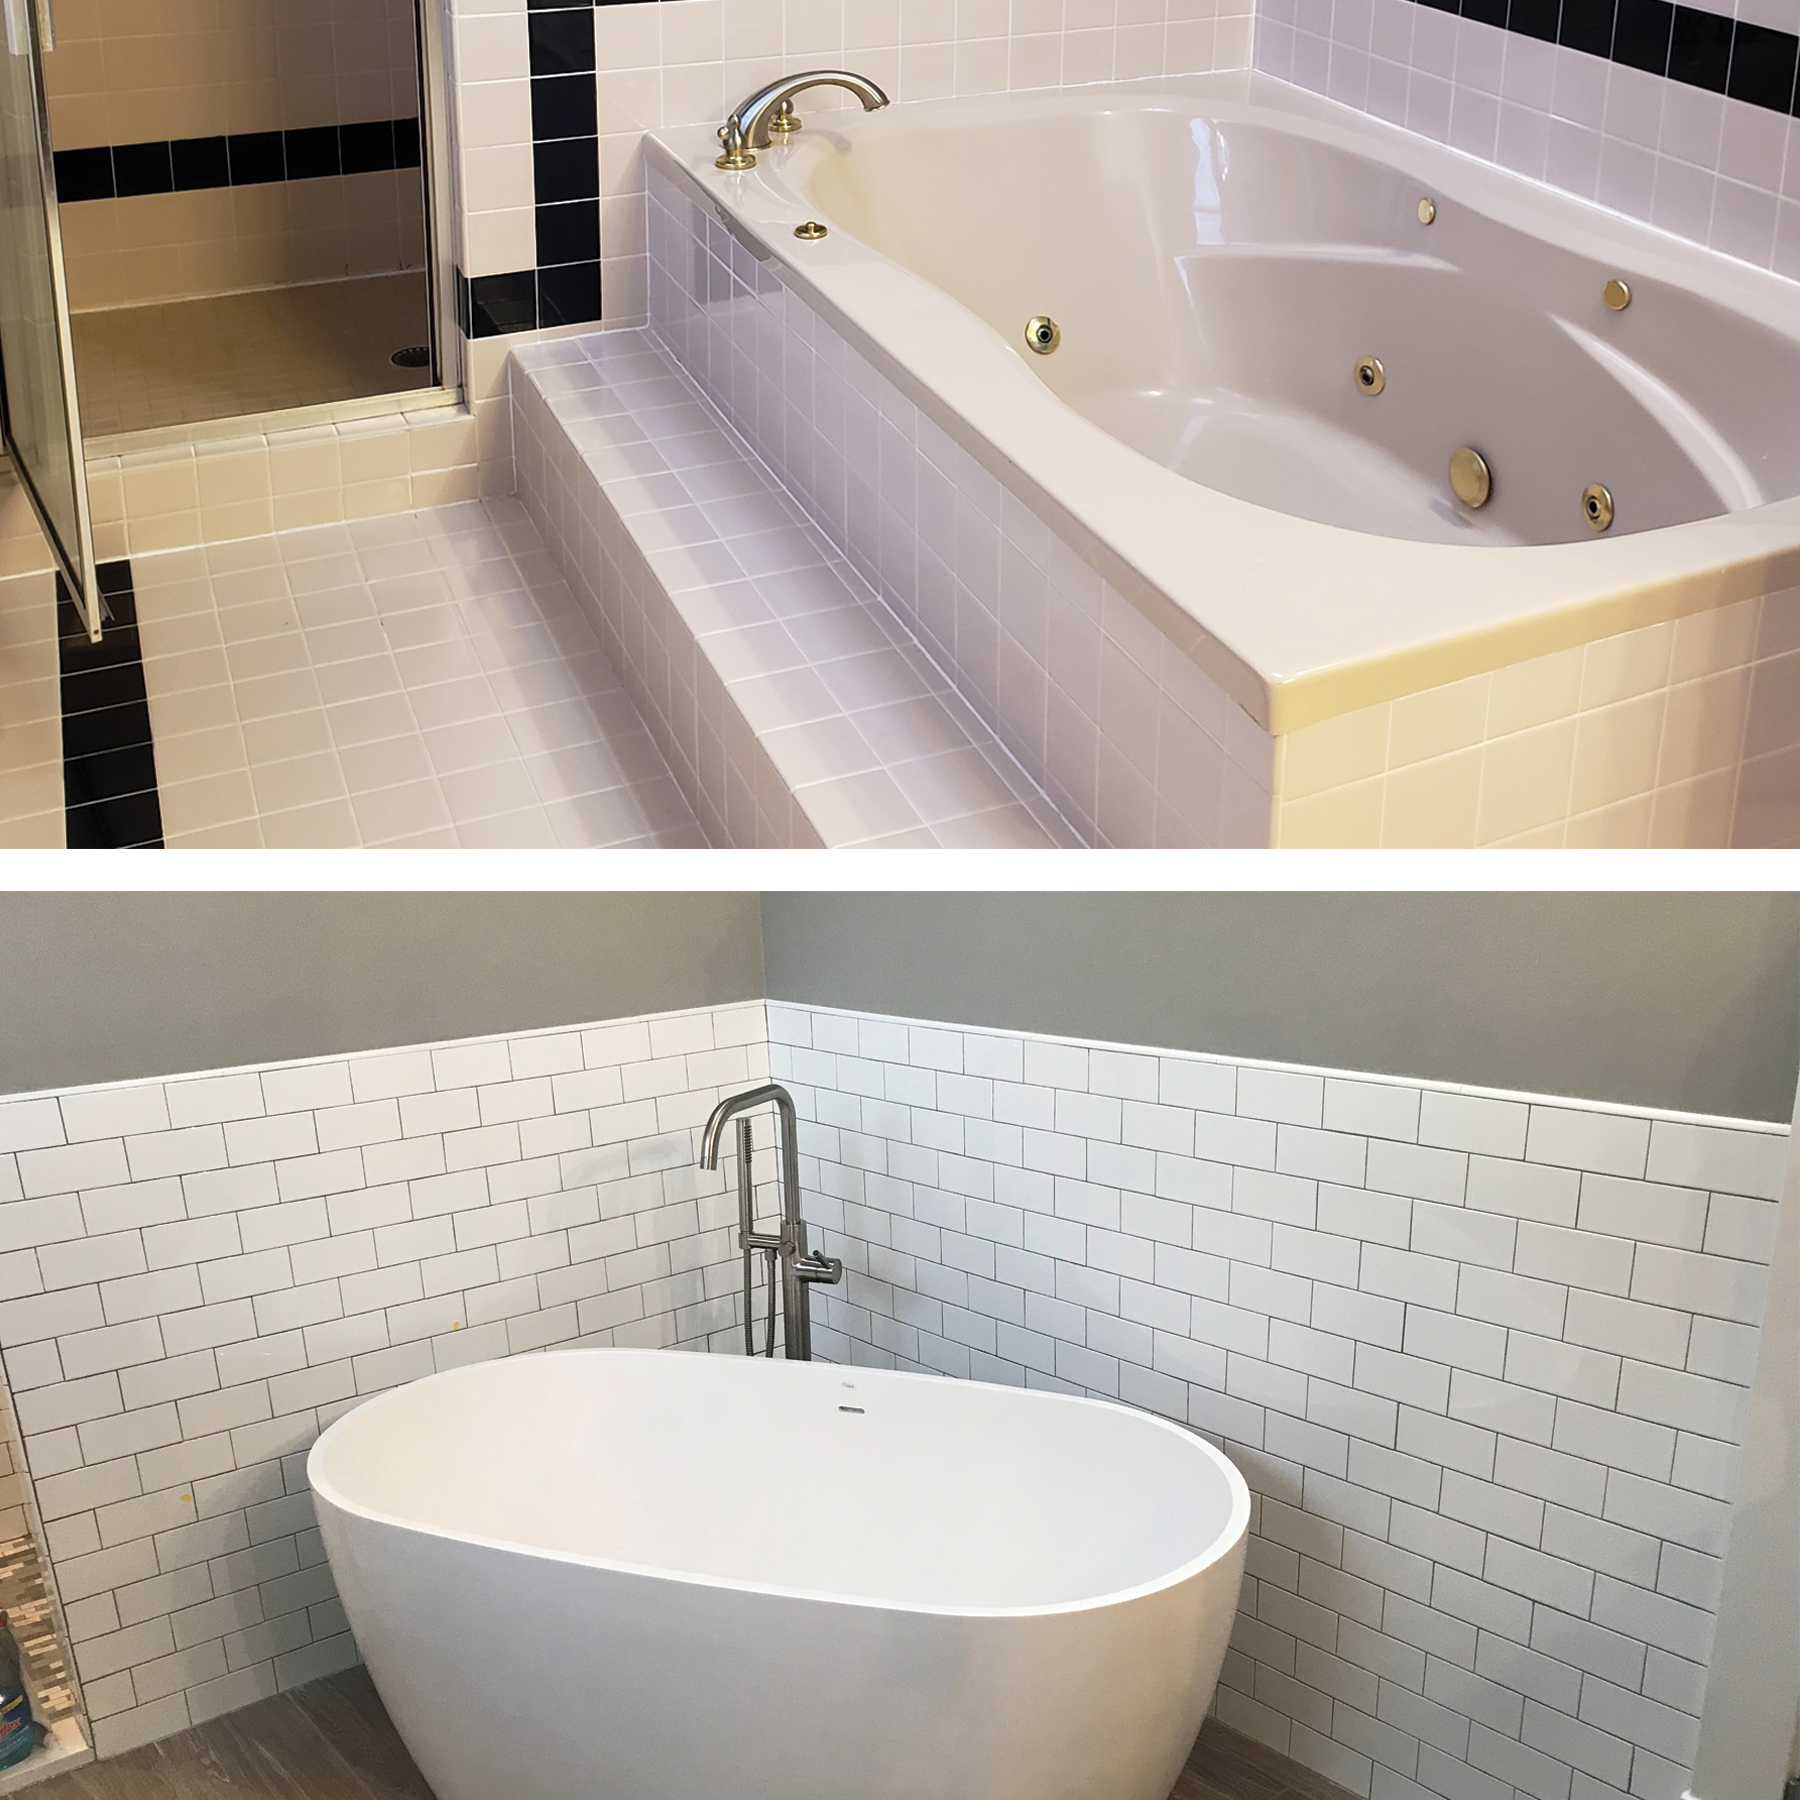 Before and After Bathtub Replacement